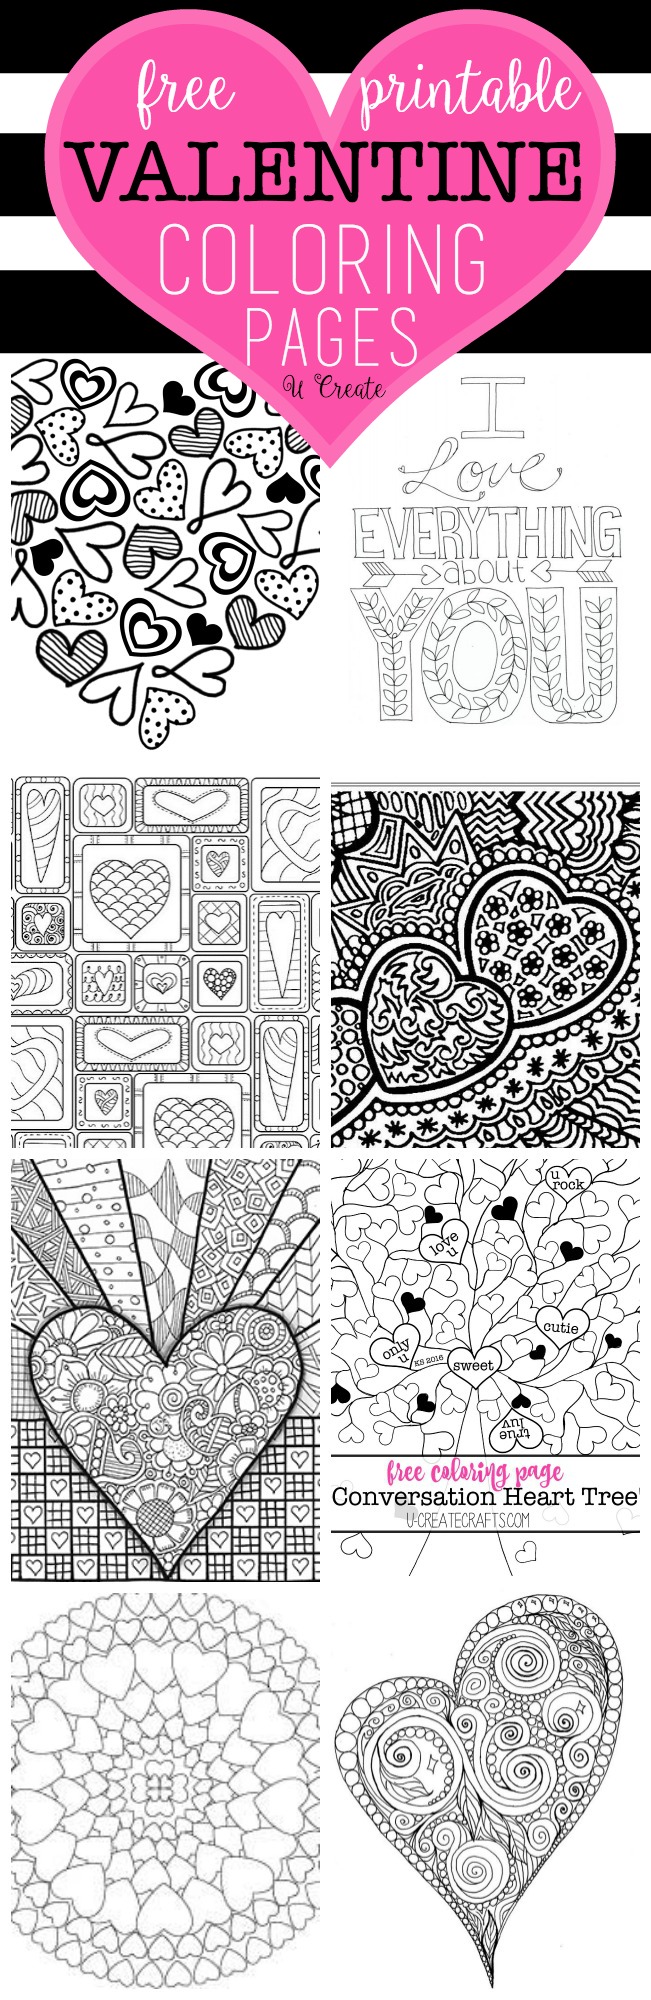 Free Valentine Coloring Pages at u-createcrafts.com